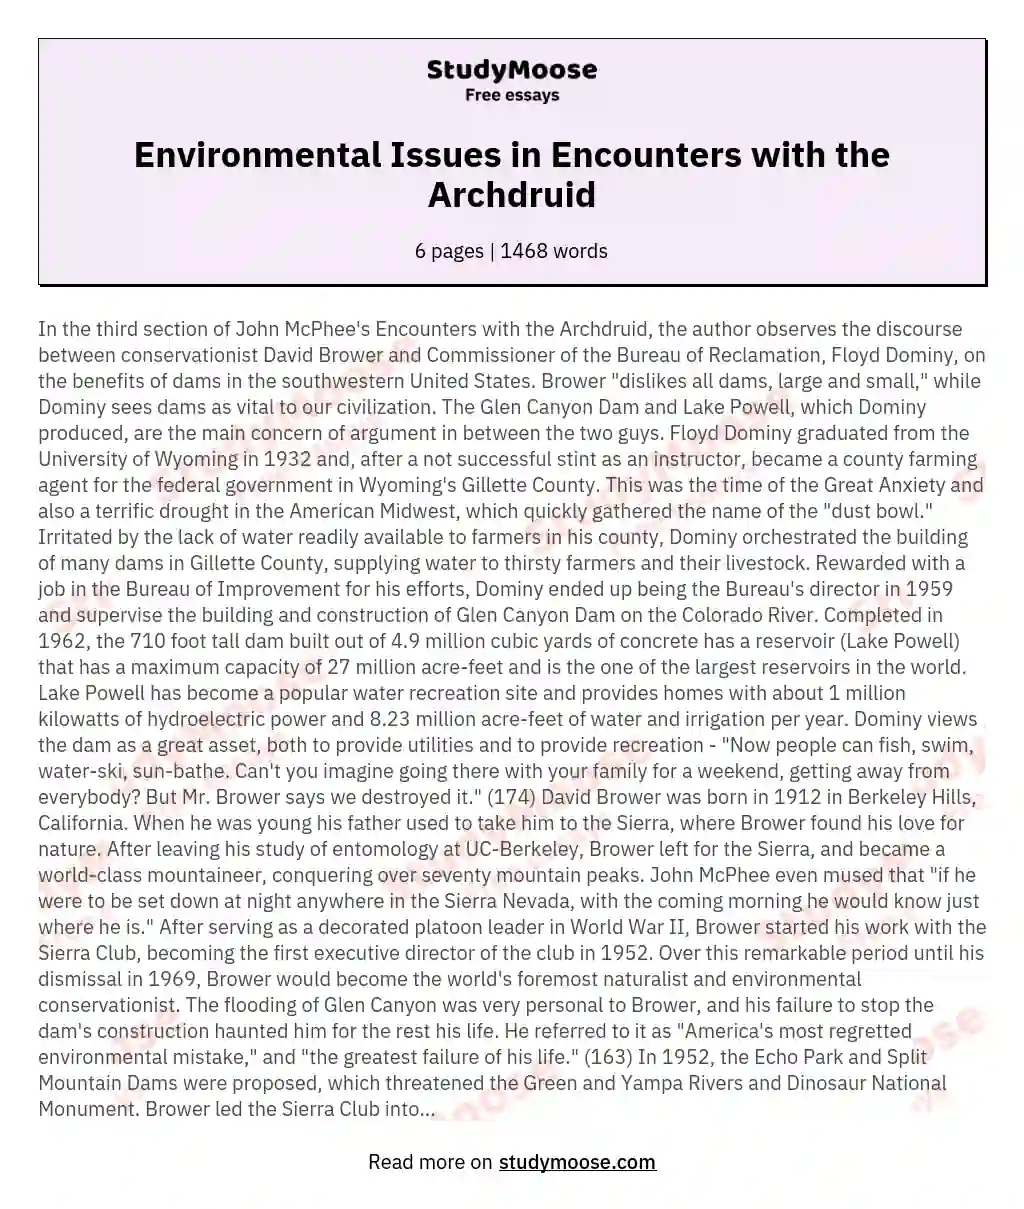 Environmental Issues in Encounters with the Archdruid essay